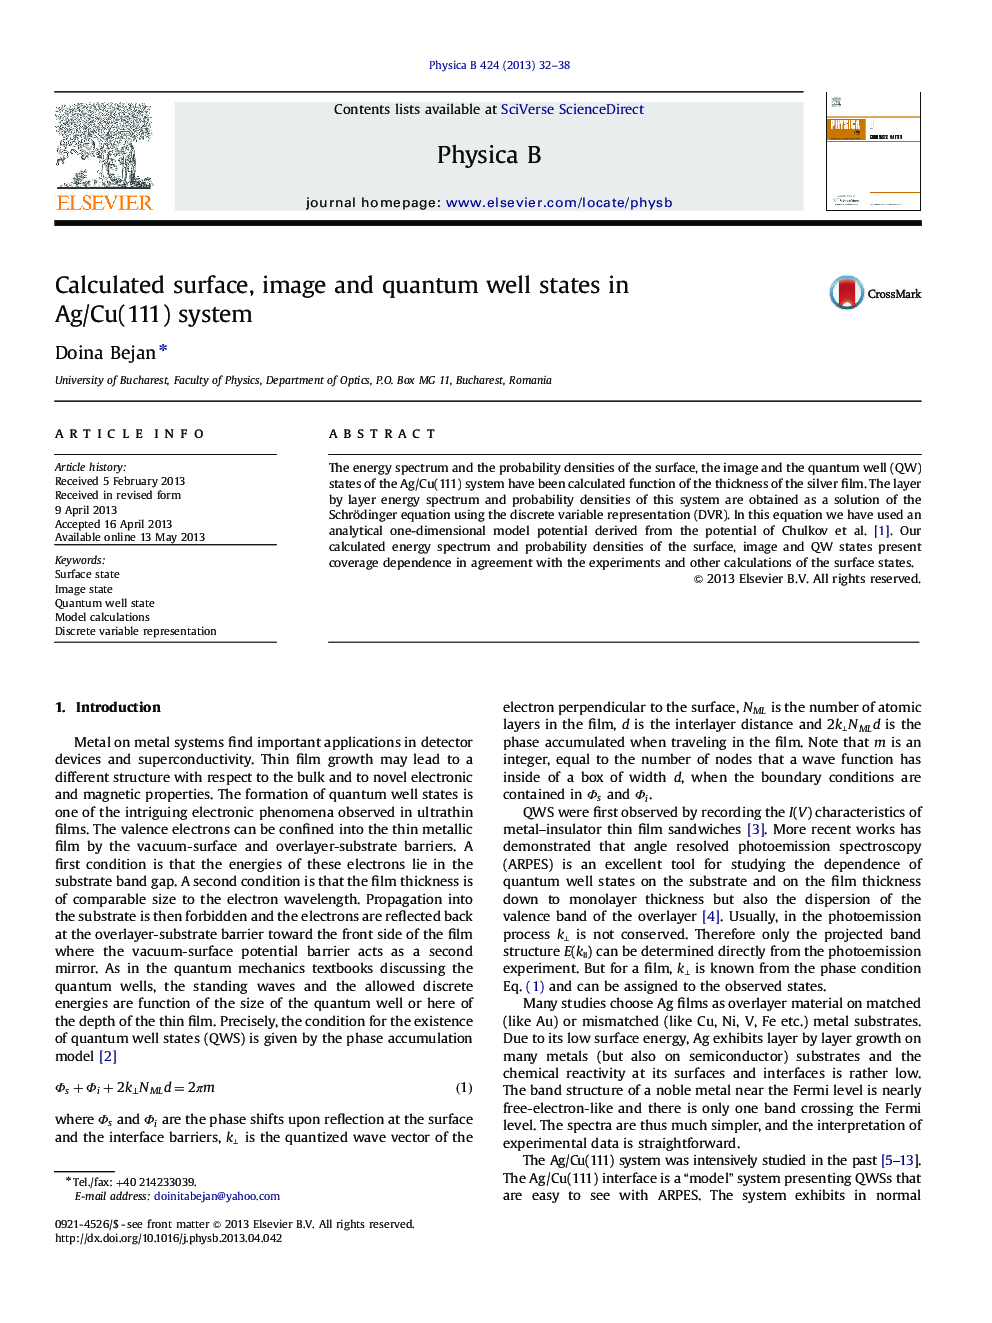 Calculated surface, image and quantum well states in Ag/Cu(111) system